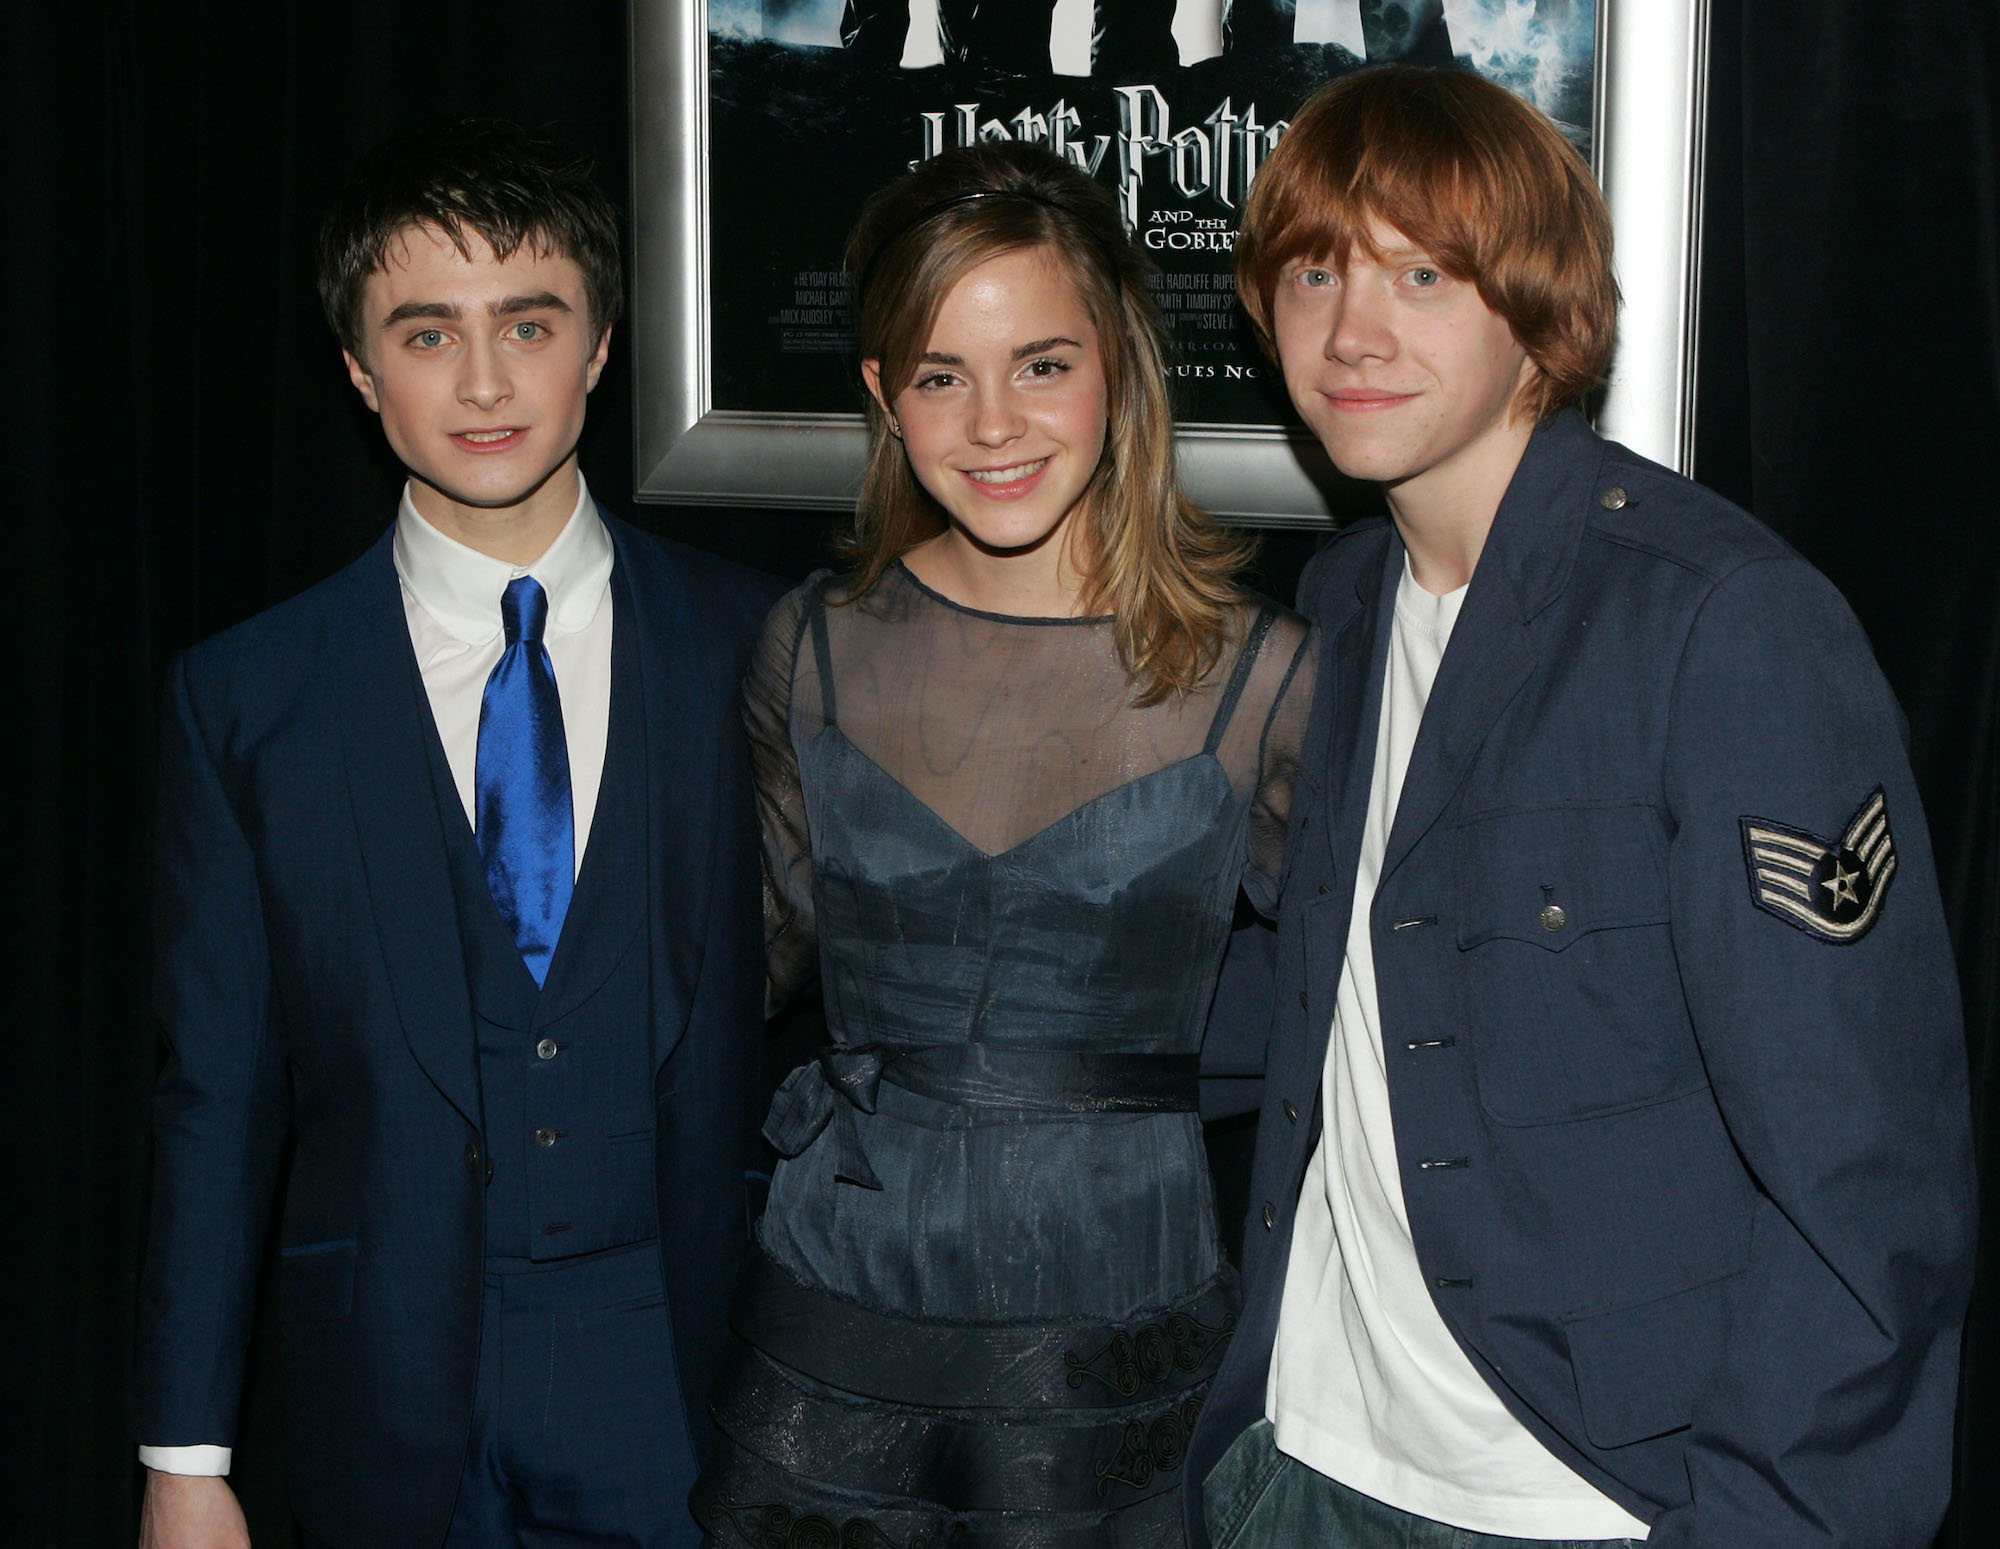 Daniel Radcliffe, Emma Watson and Rupert Grint in 2005, smiling